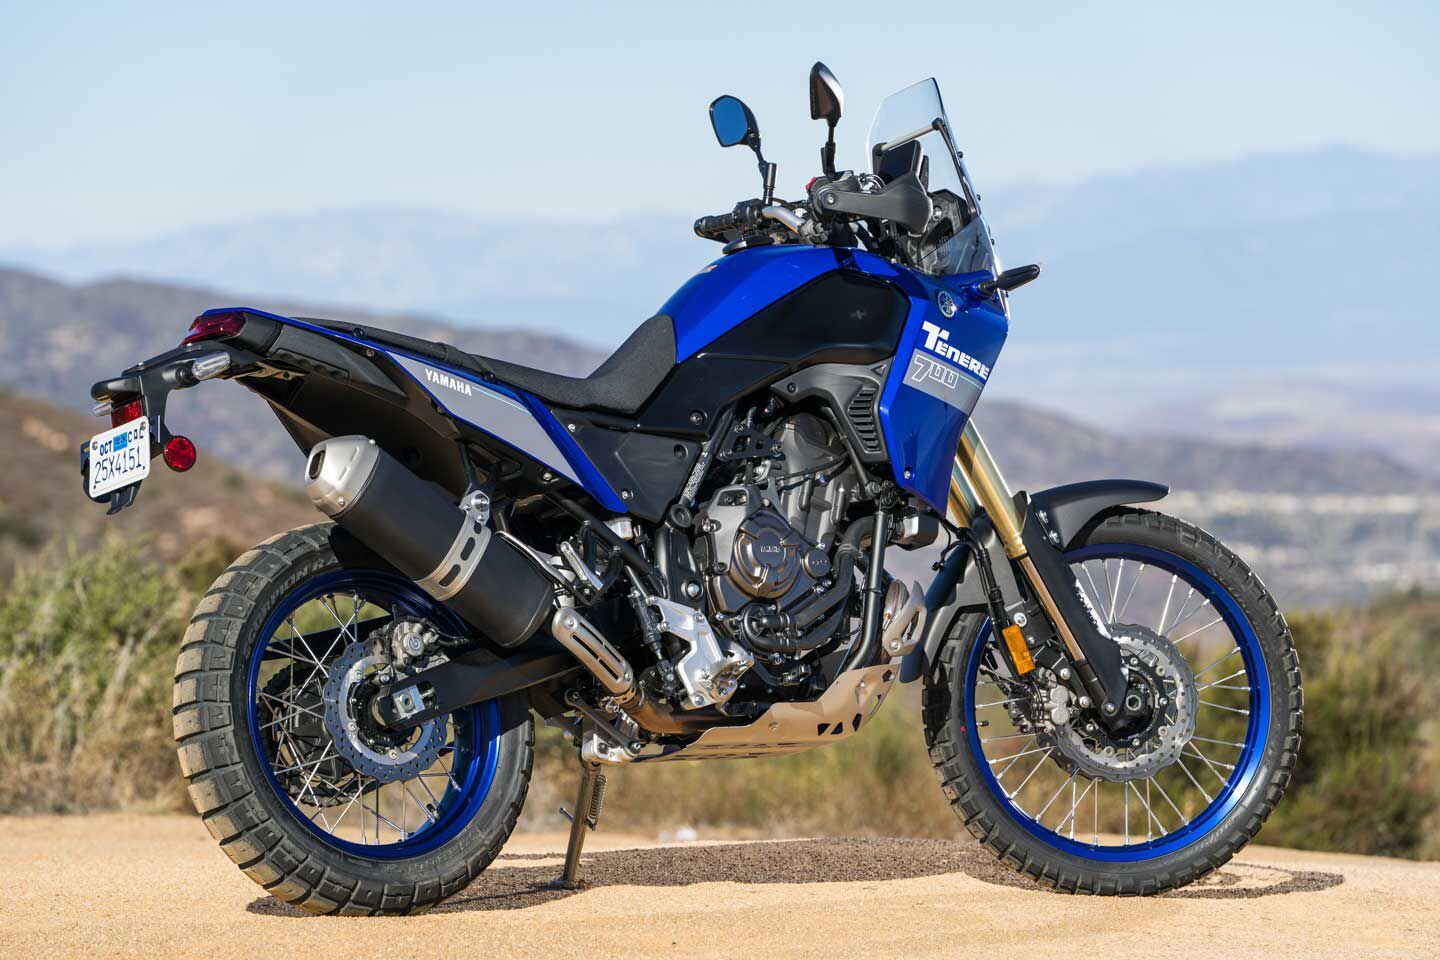 With 4.2 gallons of fuel, the Yamaha weighs 452 pounds. It feels much lighter than its curb weight implies in motion.